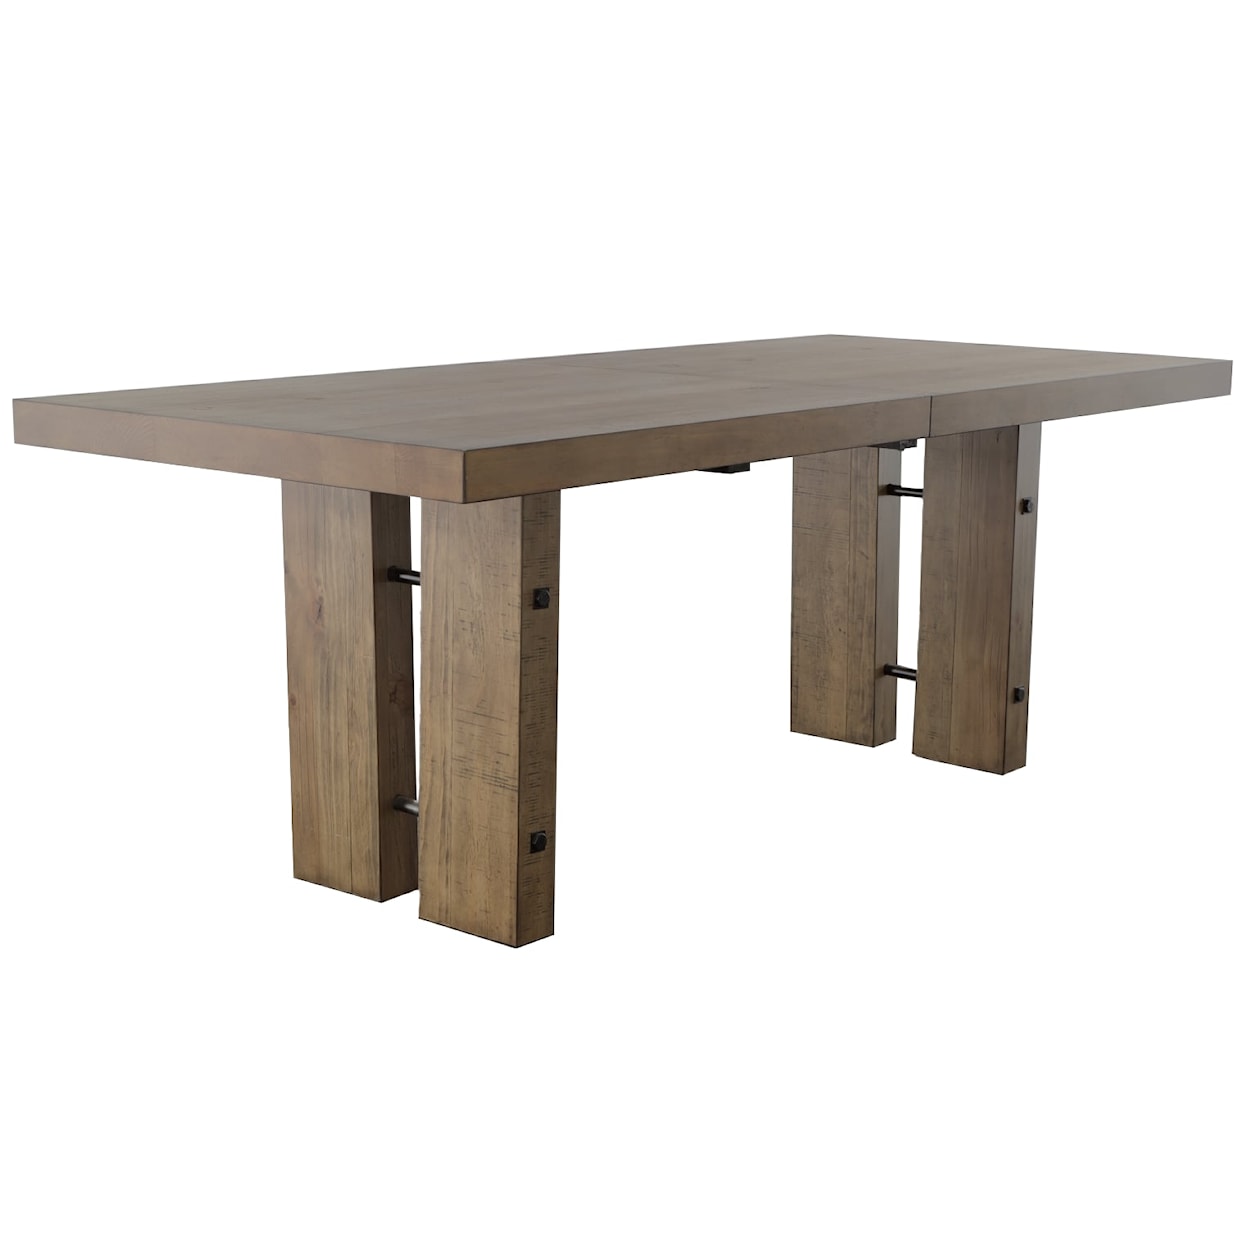 Steve Silver Atmore Atmore Dining Table 1PC